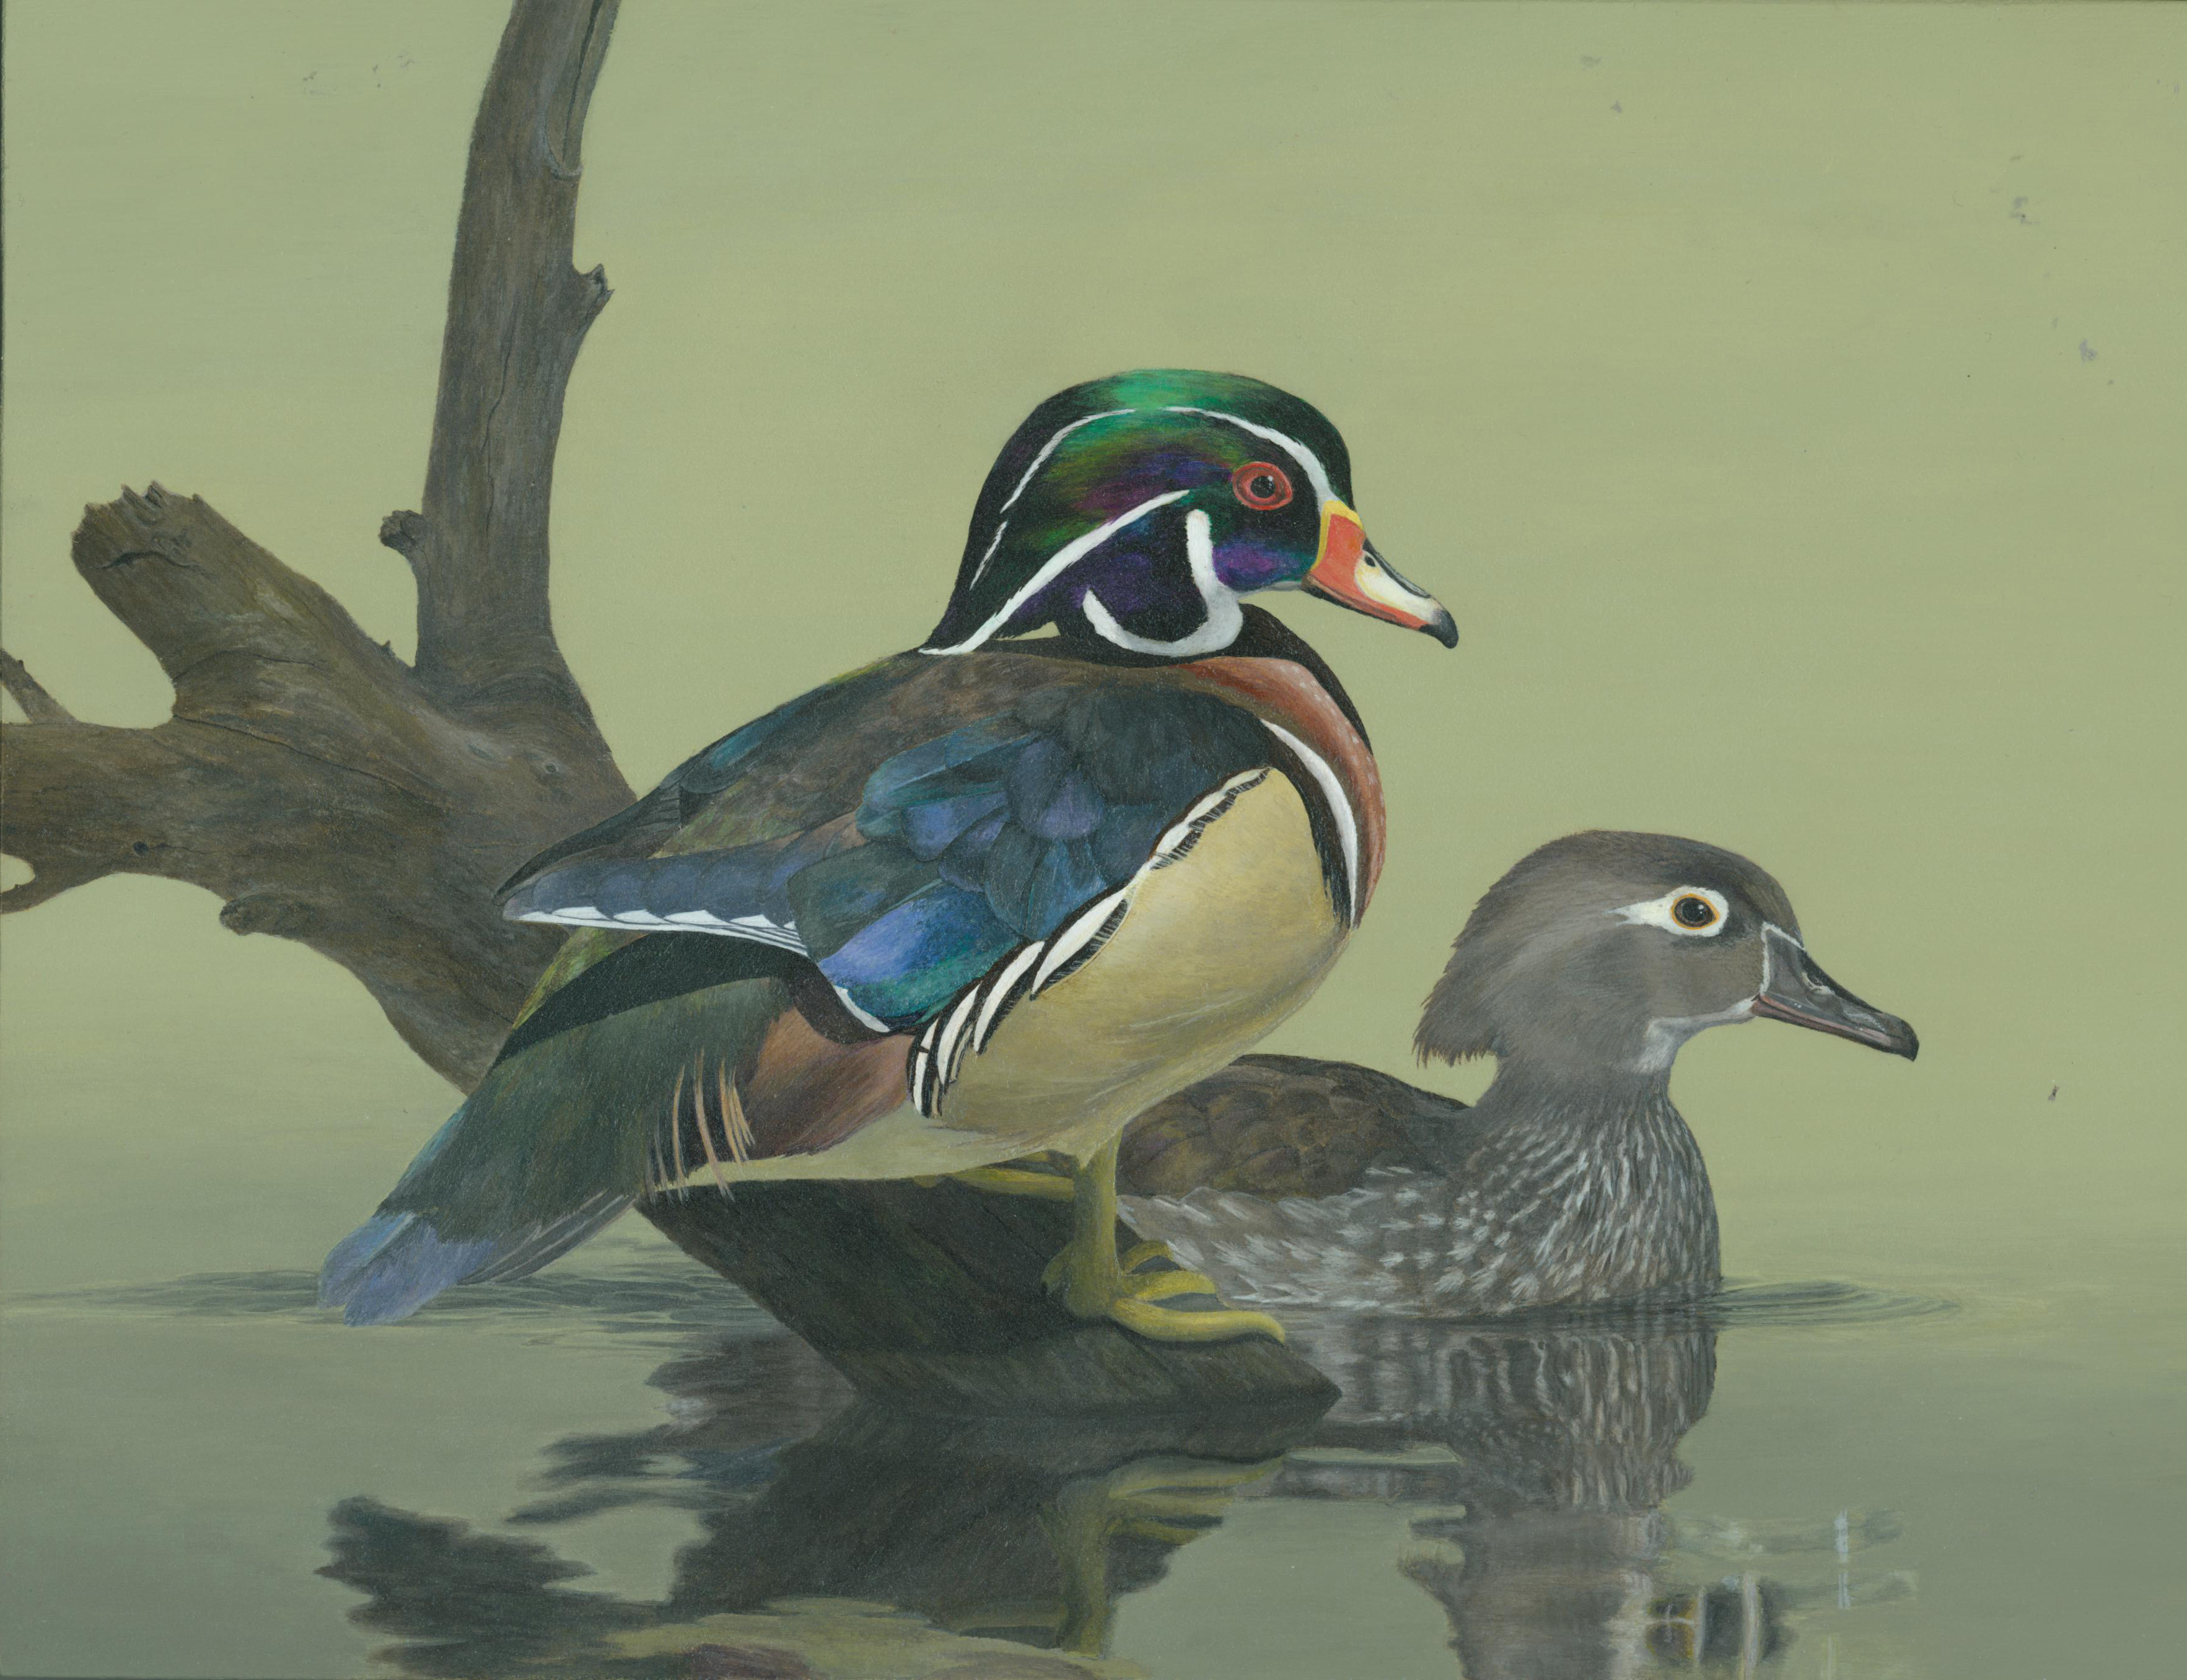 The finalist from Ohio for the 2011 Junior Duck Stamp Art Contest. (5598464622)